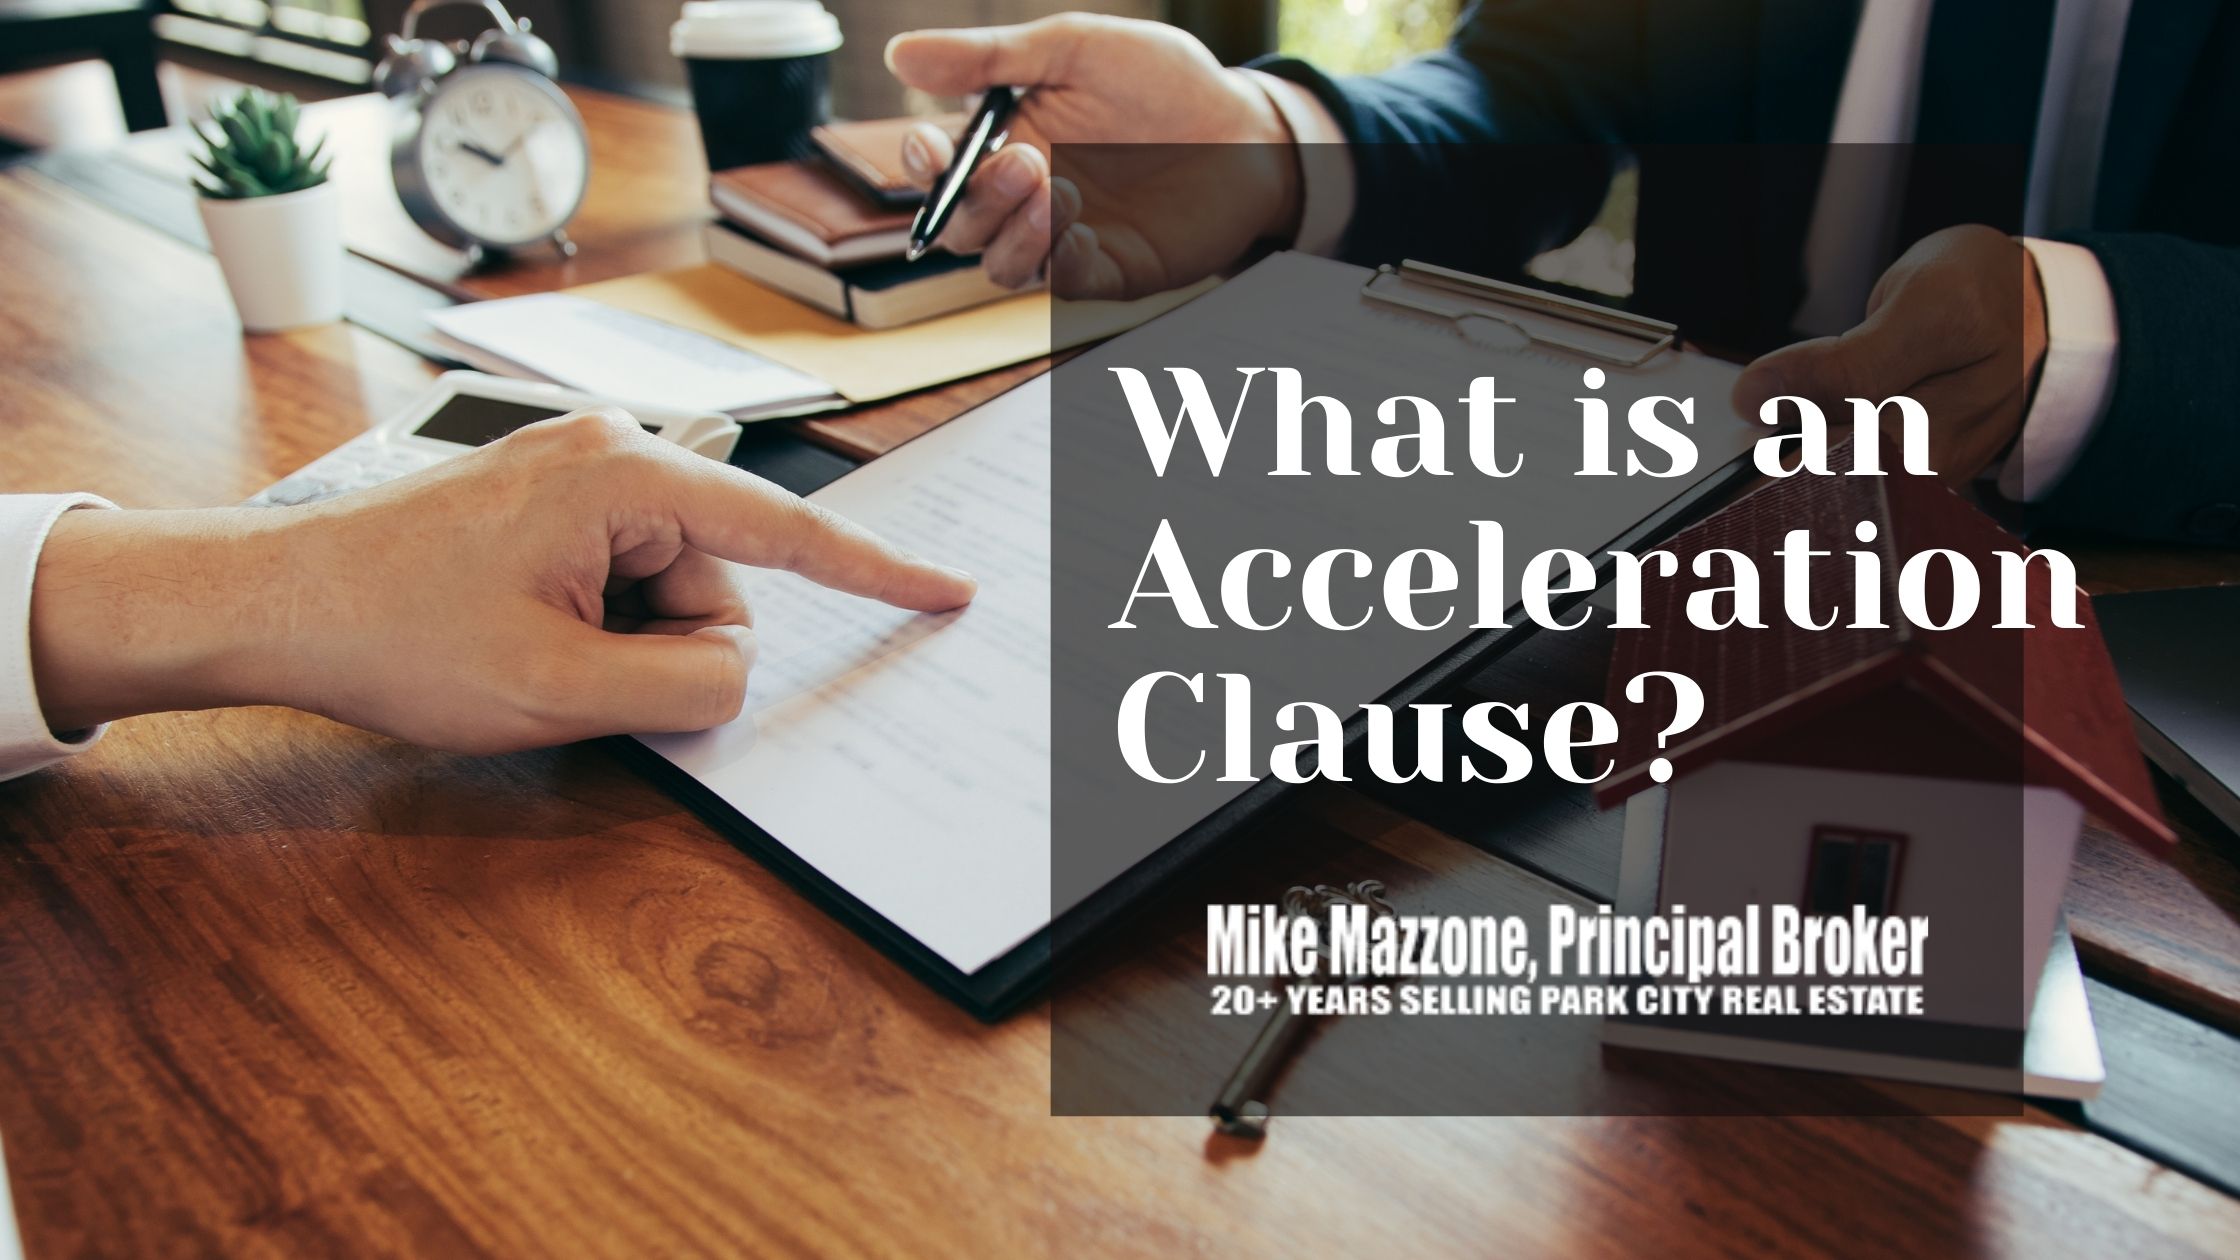 What is an Acceleration Clause